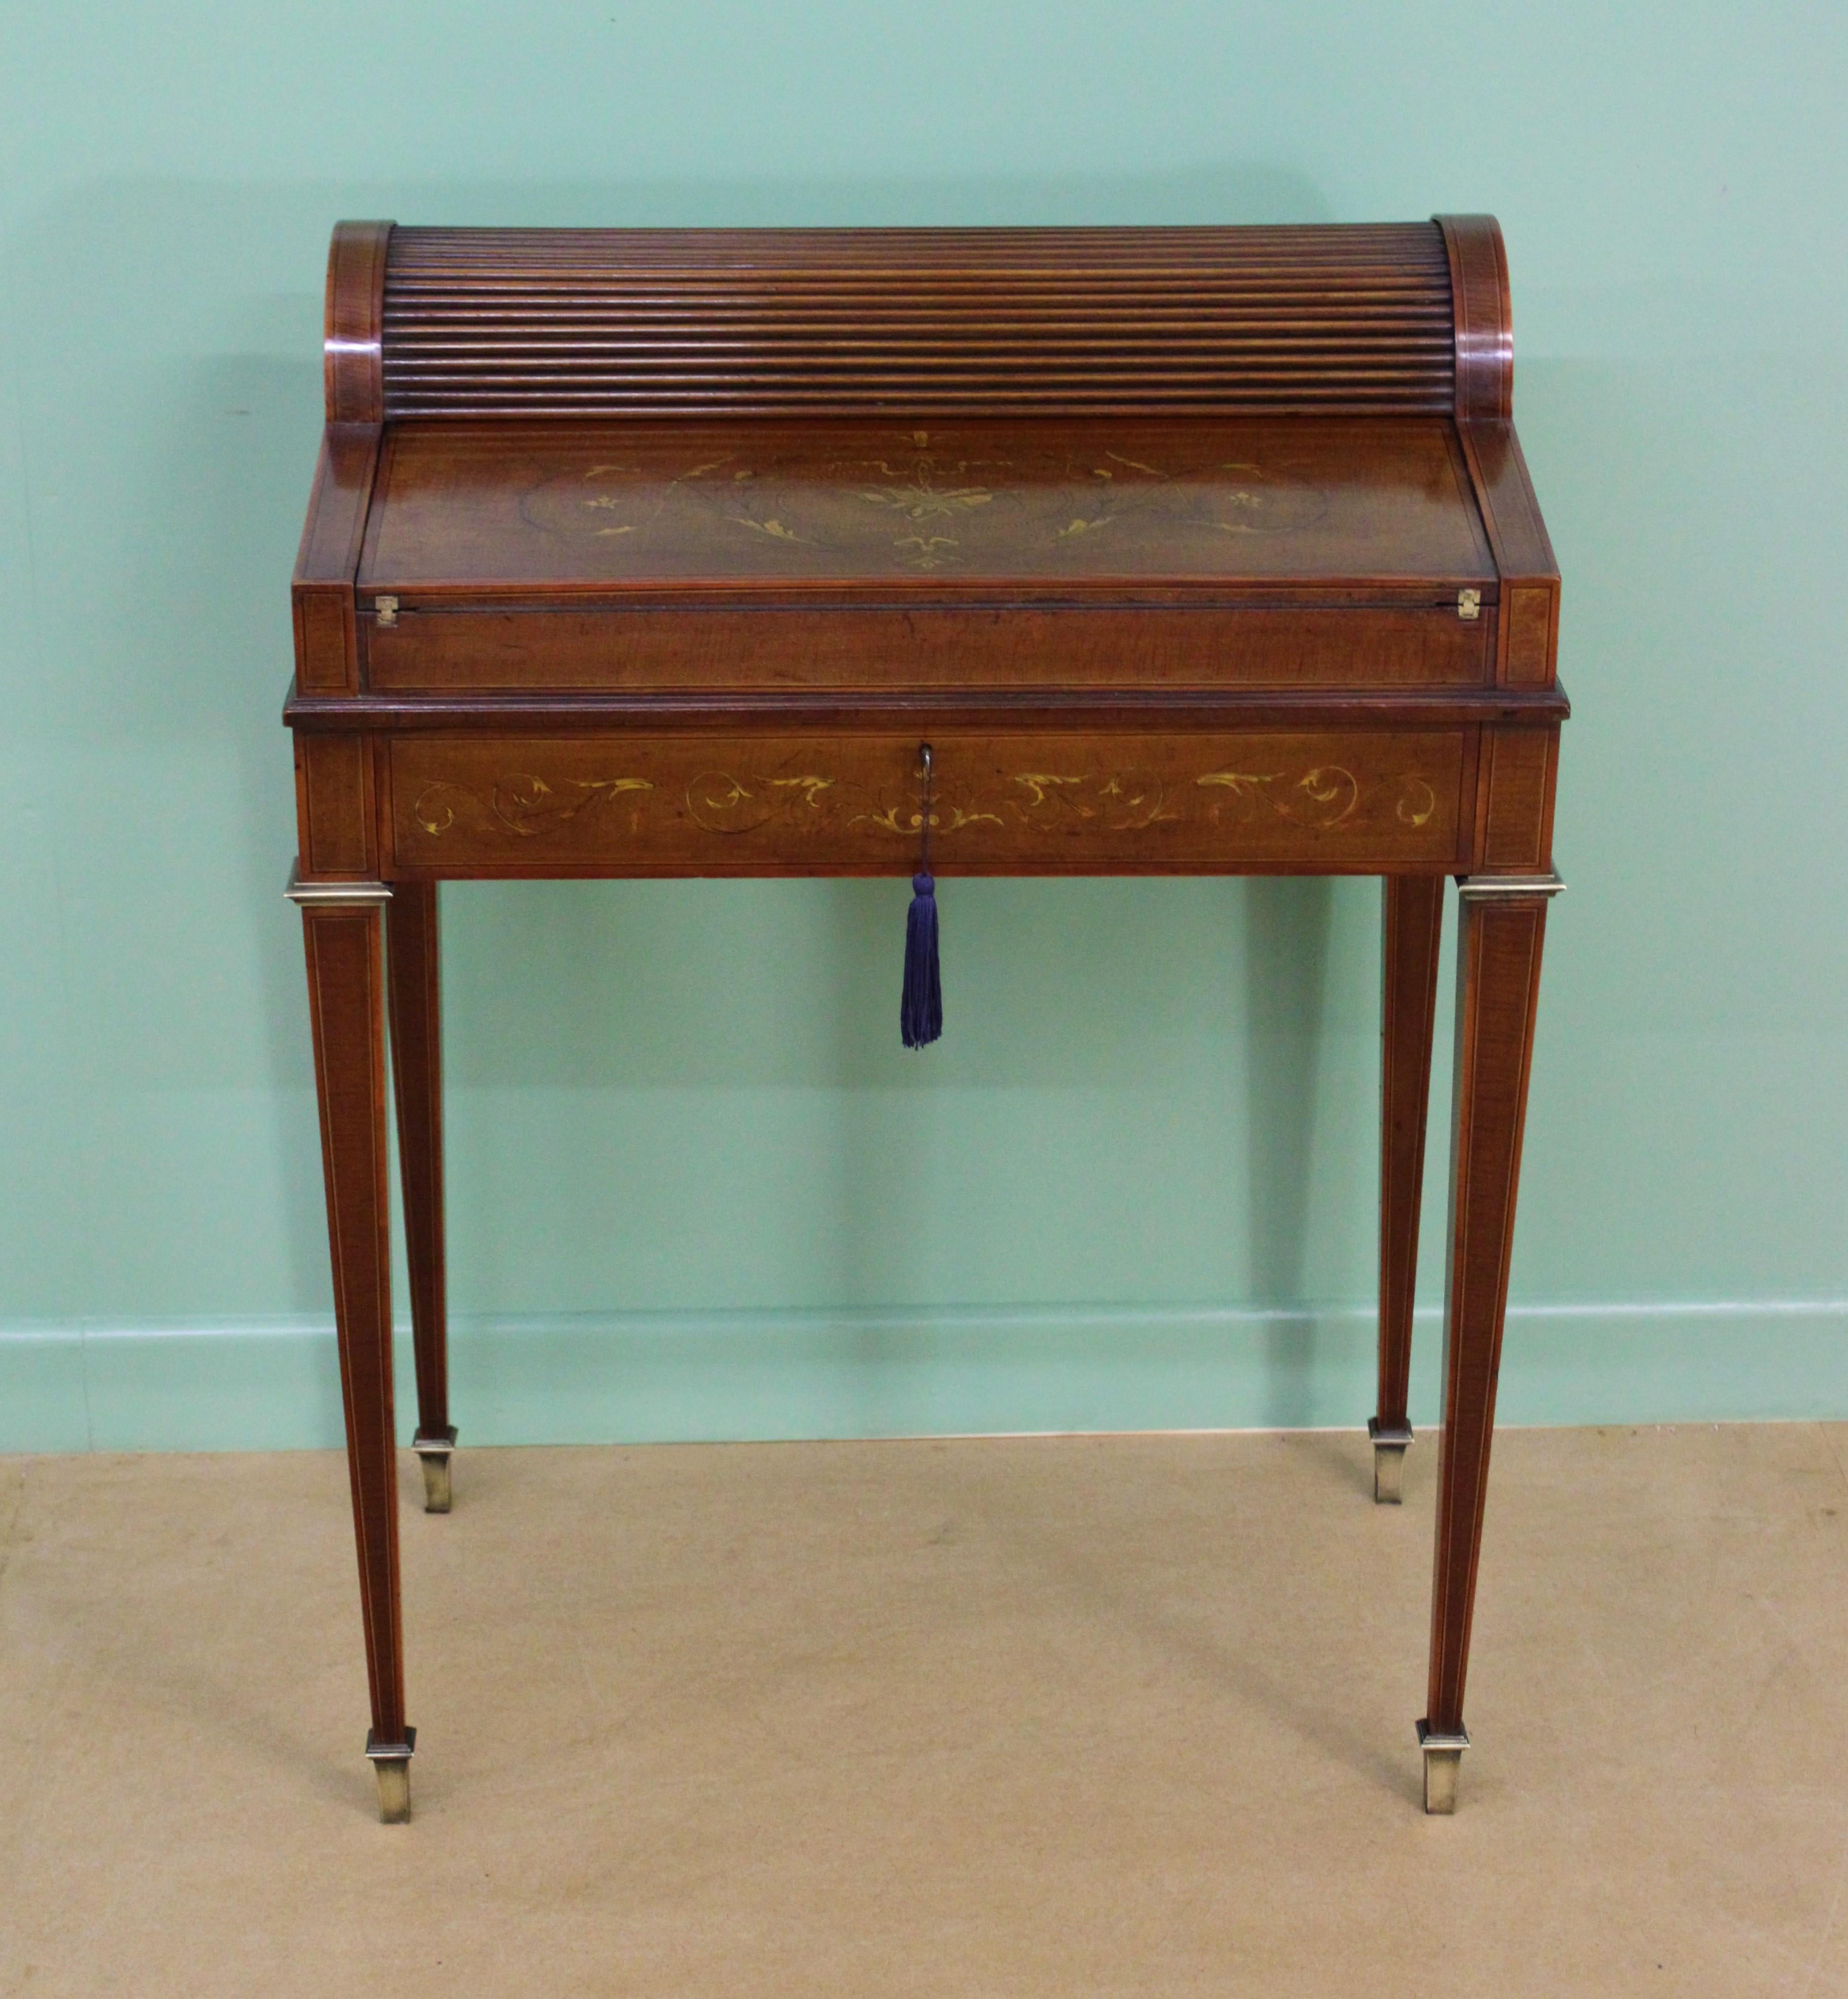 A fine quality, late Victorian period inlaid mahogany tambour topped bureau by the renowned cabinet makers Druce and Co. of London. Of excellent construction in solid mahogany with attractive fiddle-back mahogany veneers. Crossbanded in satinwood